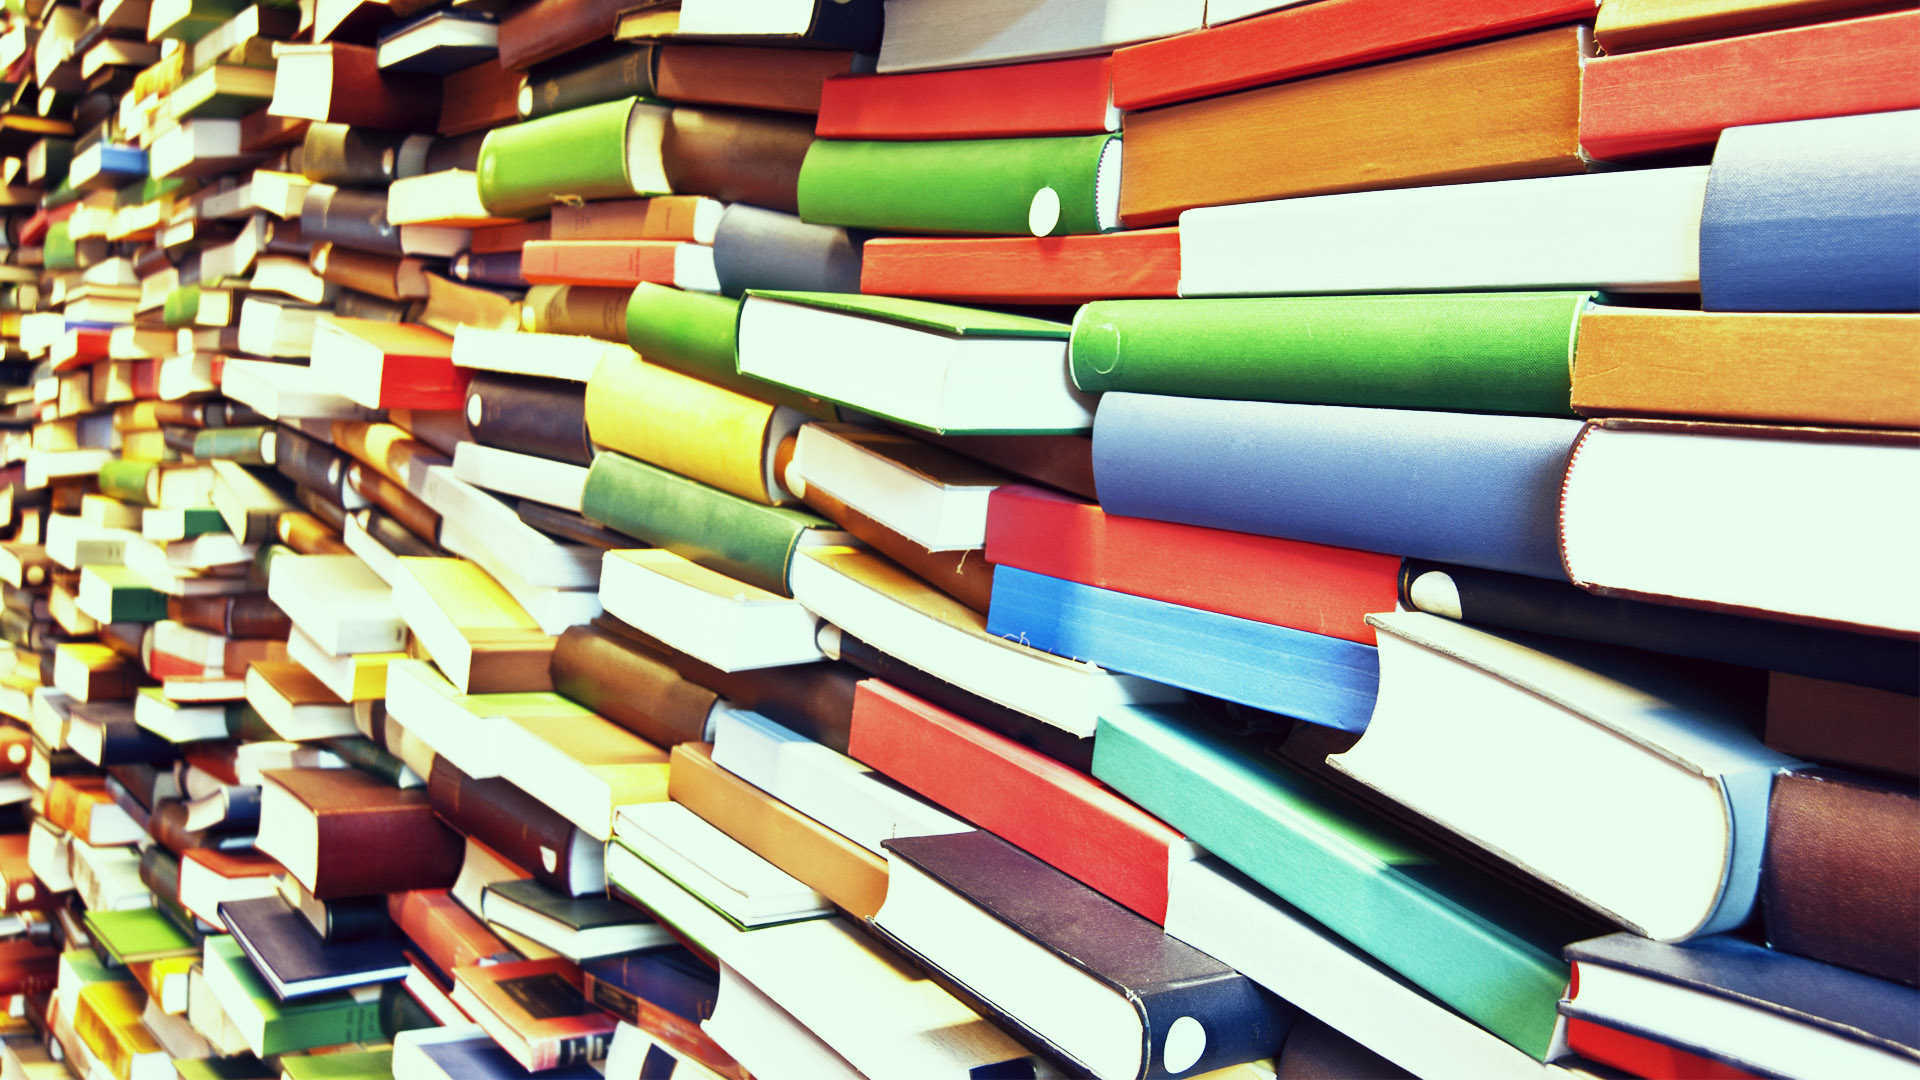 Library Books Images Hd - HD Wallpaper 